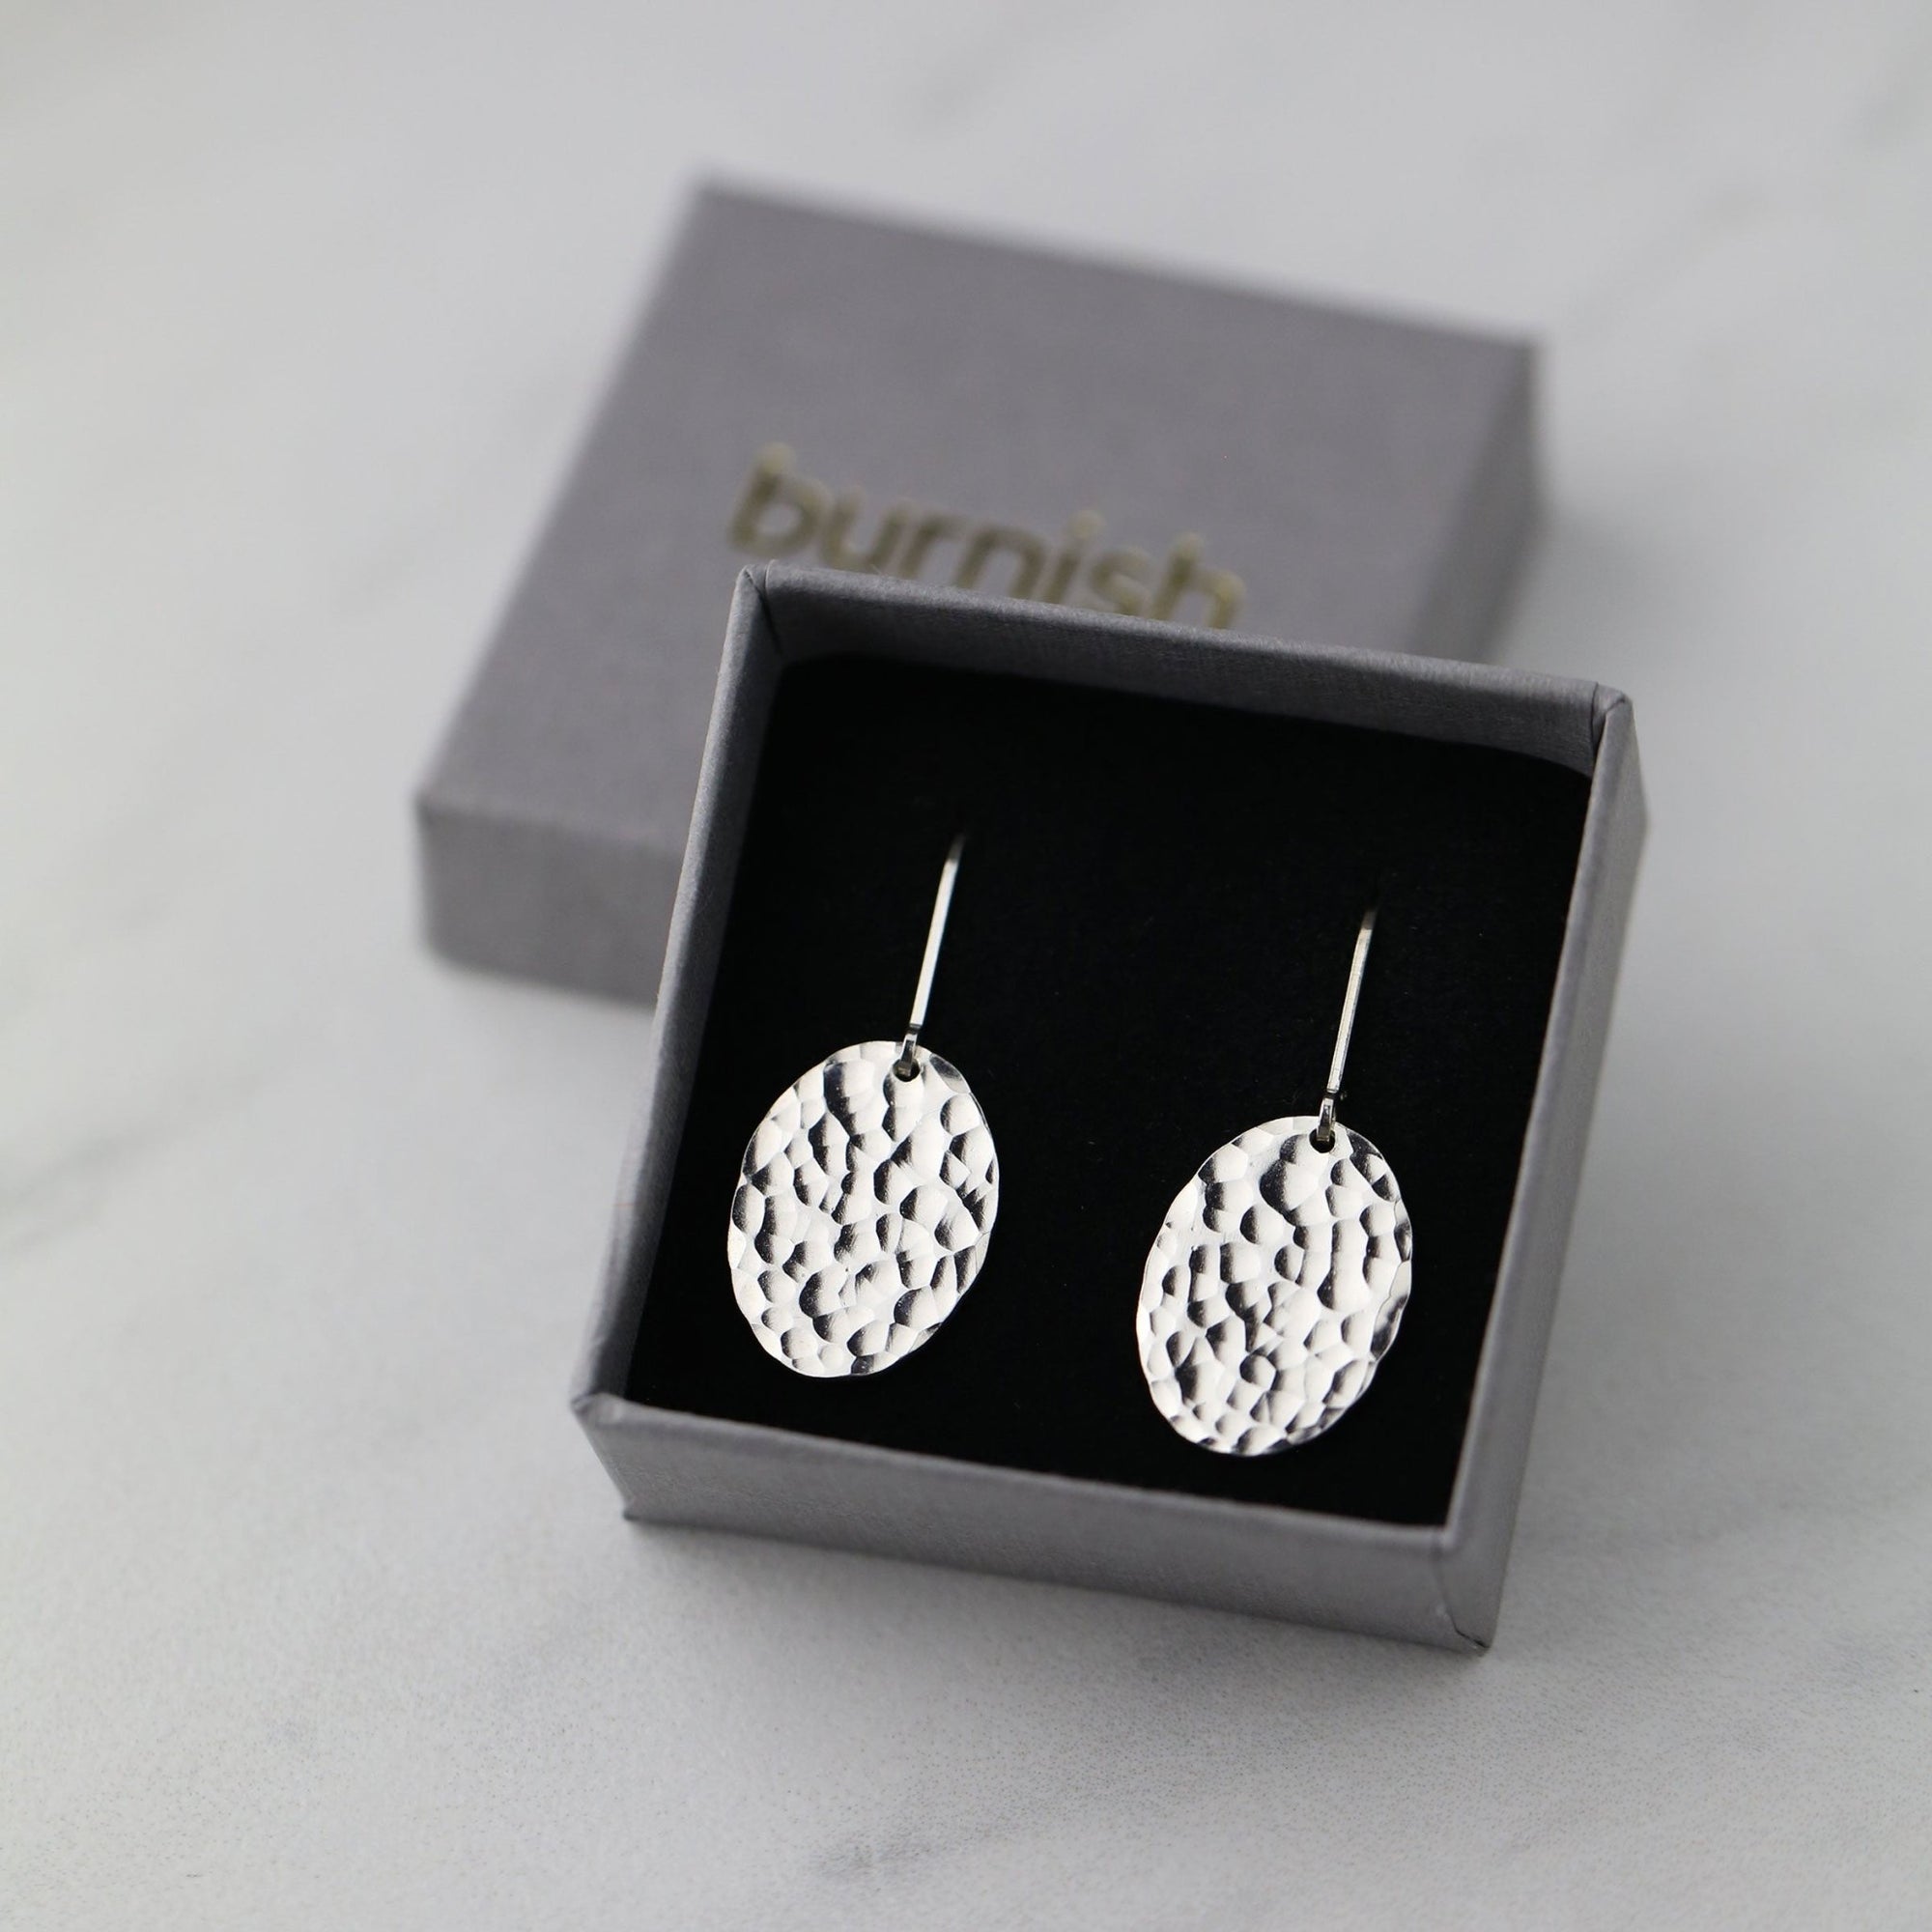 Oval Hammered Silver Lever-back Earrings handmade by Burnish